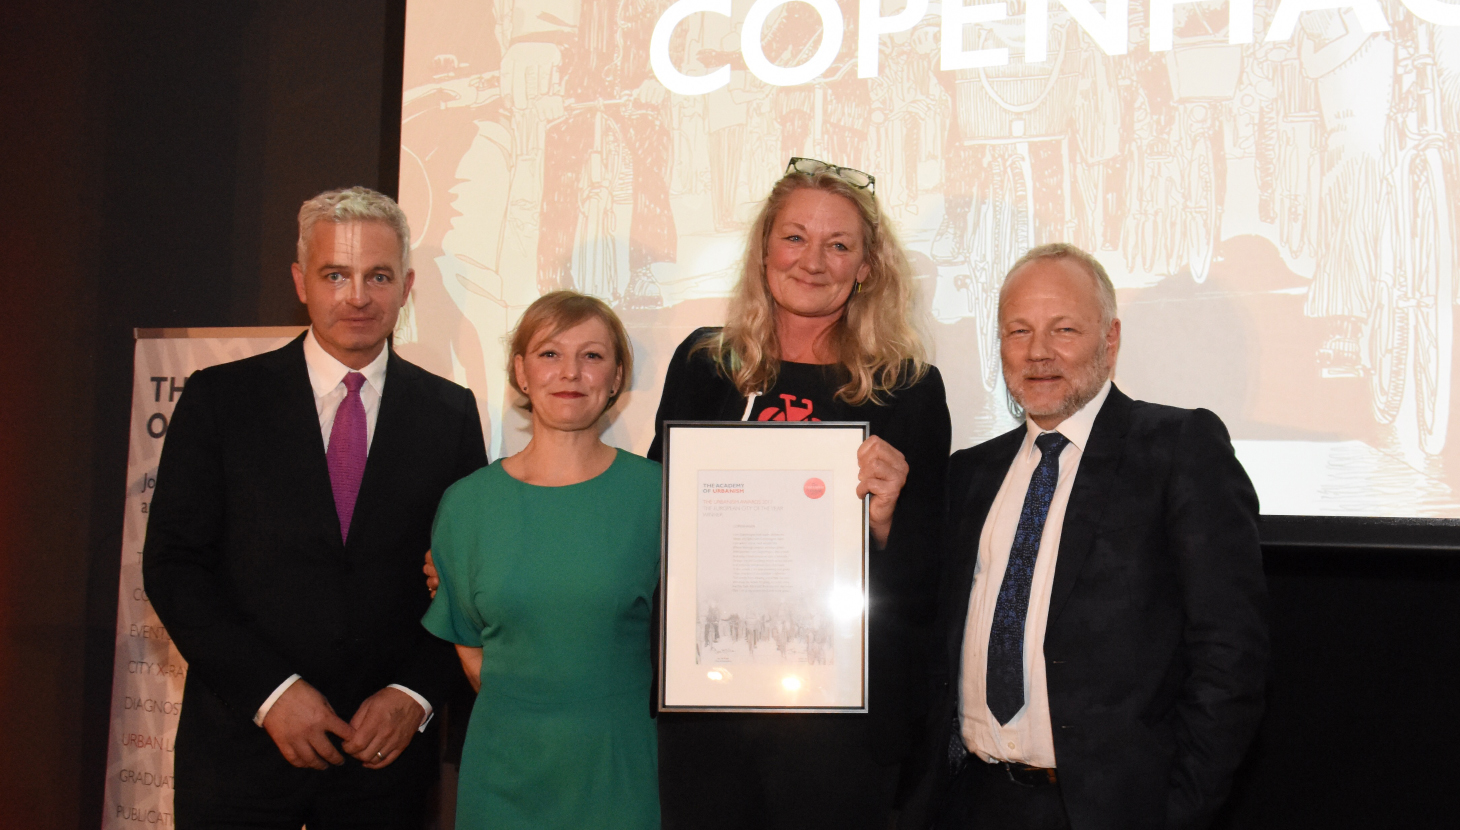 Tina Saaby, City Architect for Copenhagen collects 2017 European City of the Year Award